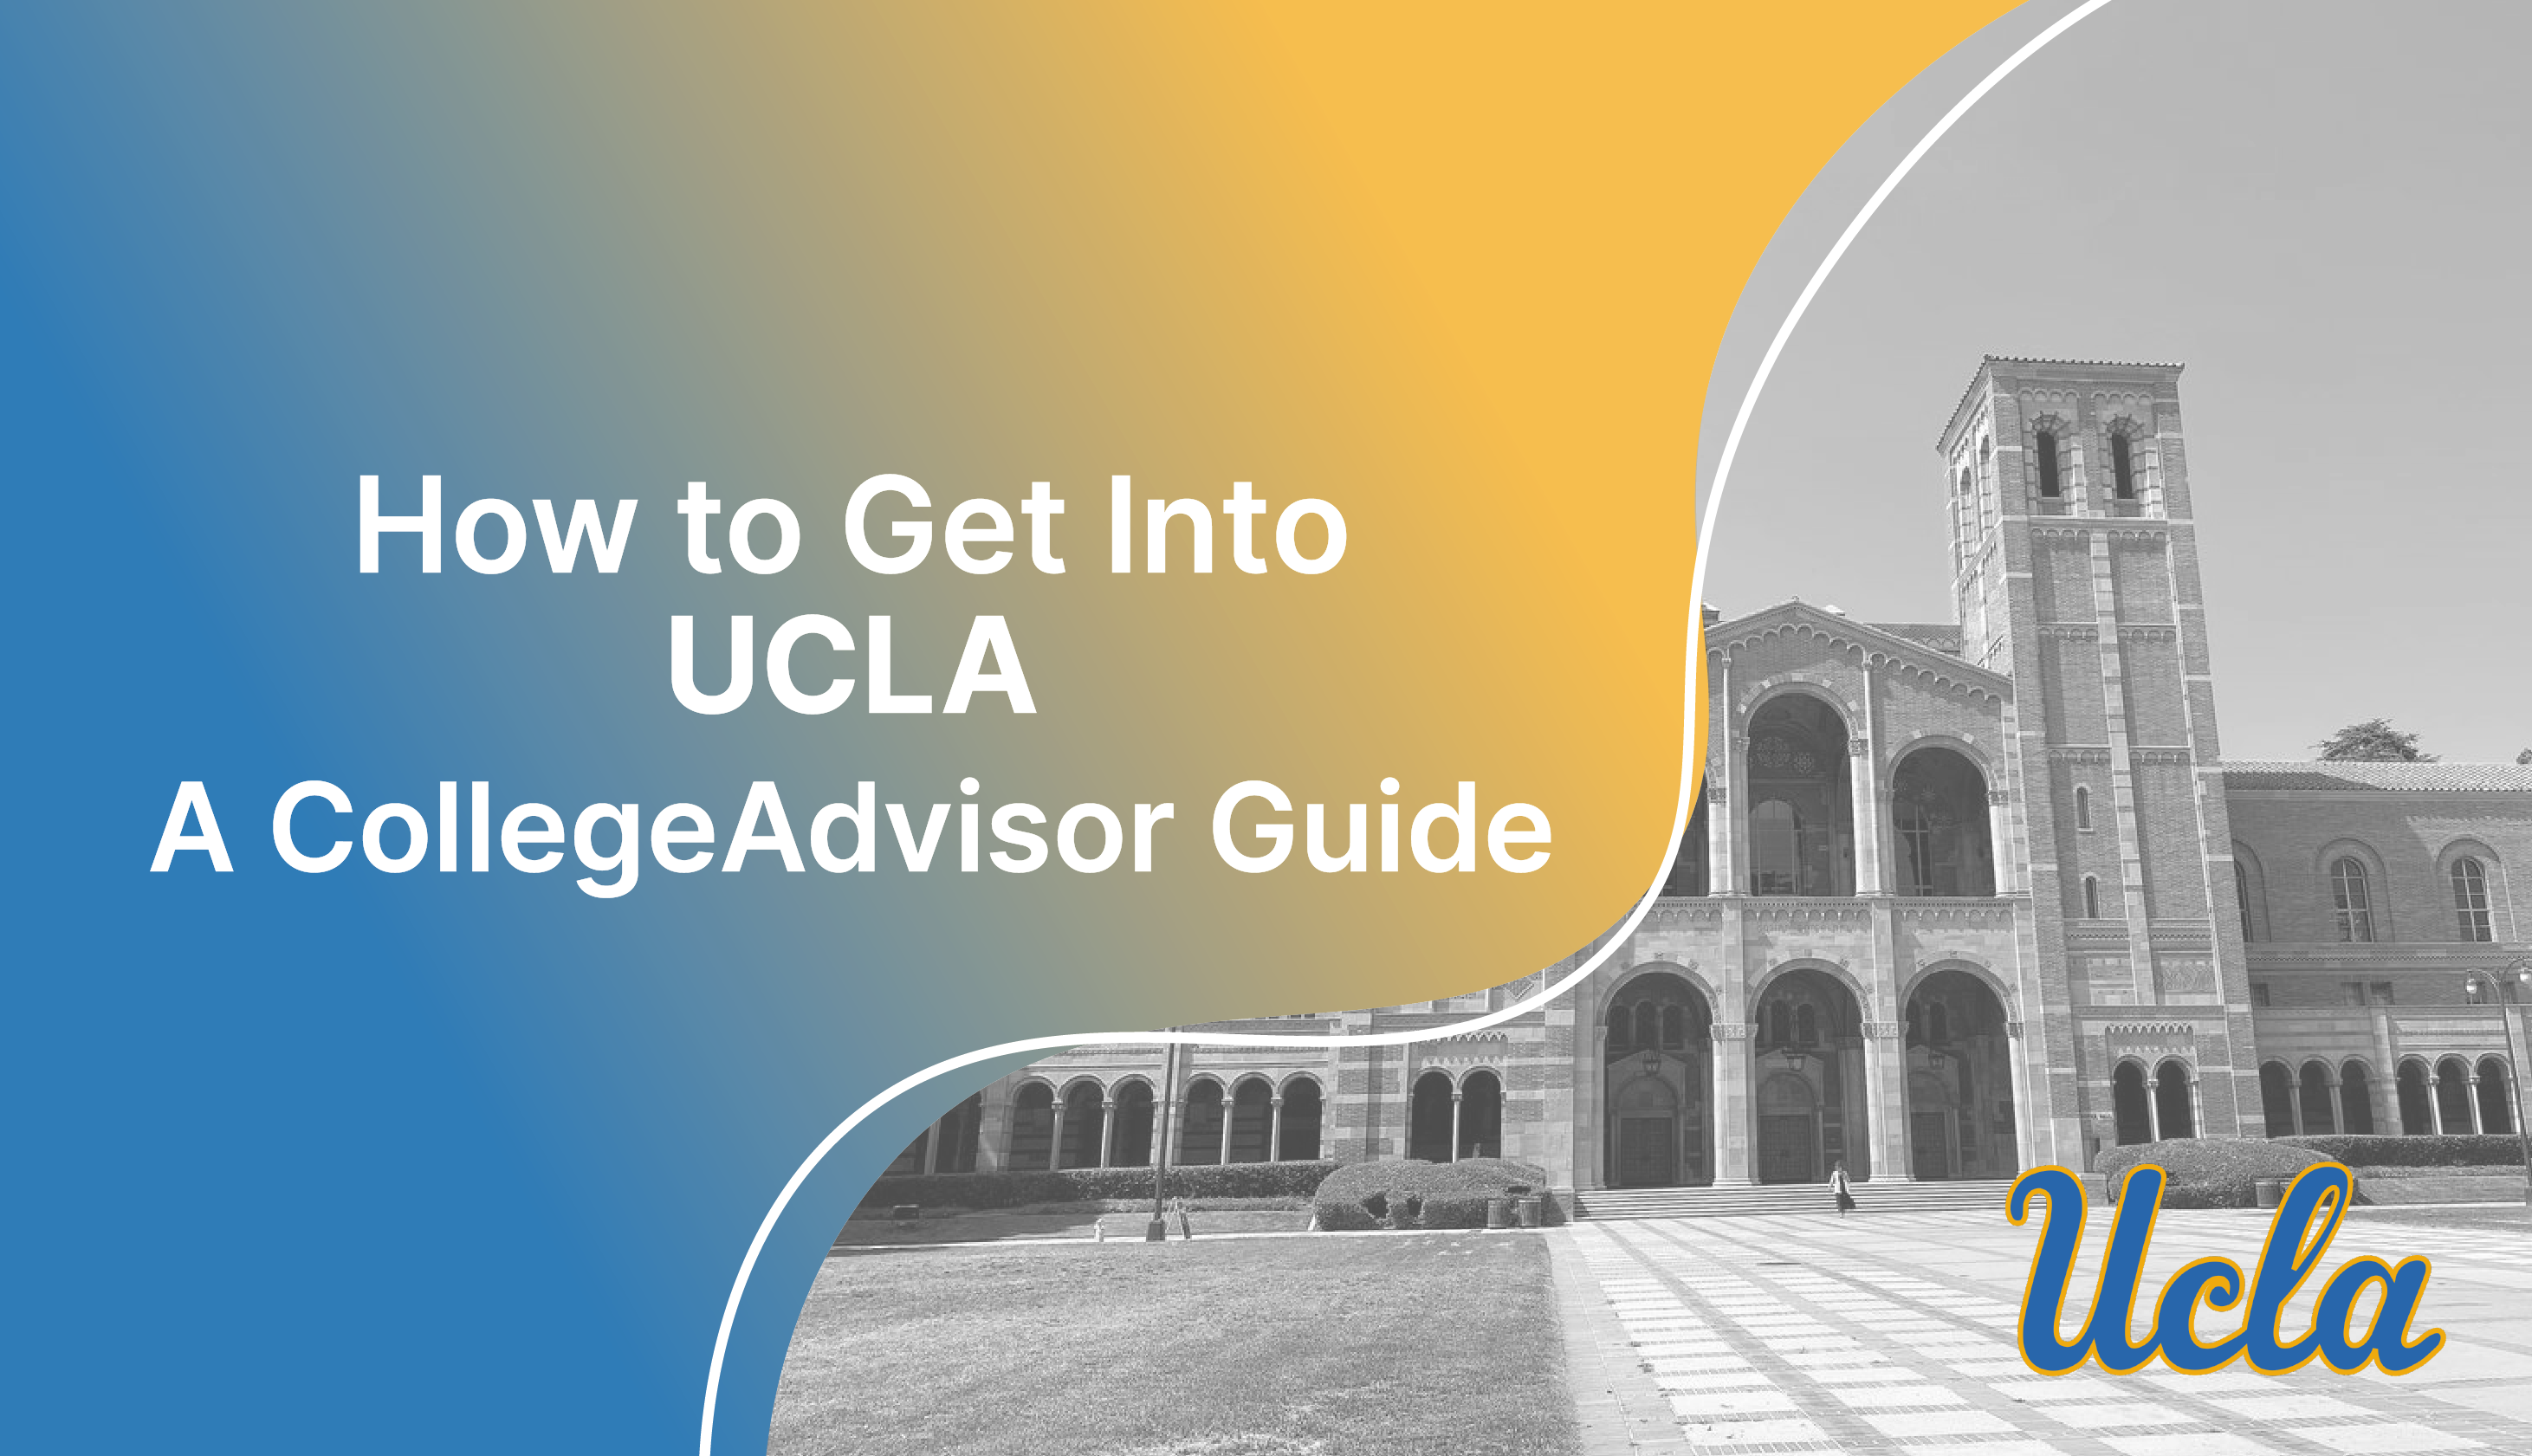 Your Guide to Visiting the UCLA Campus